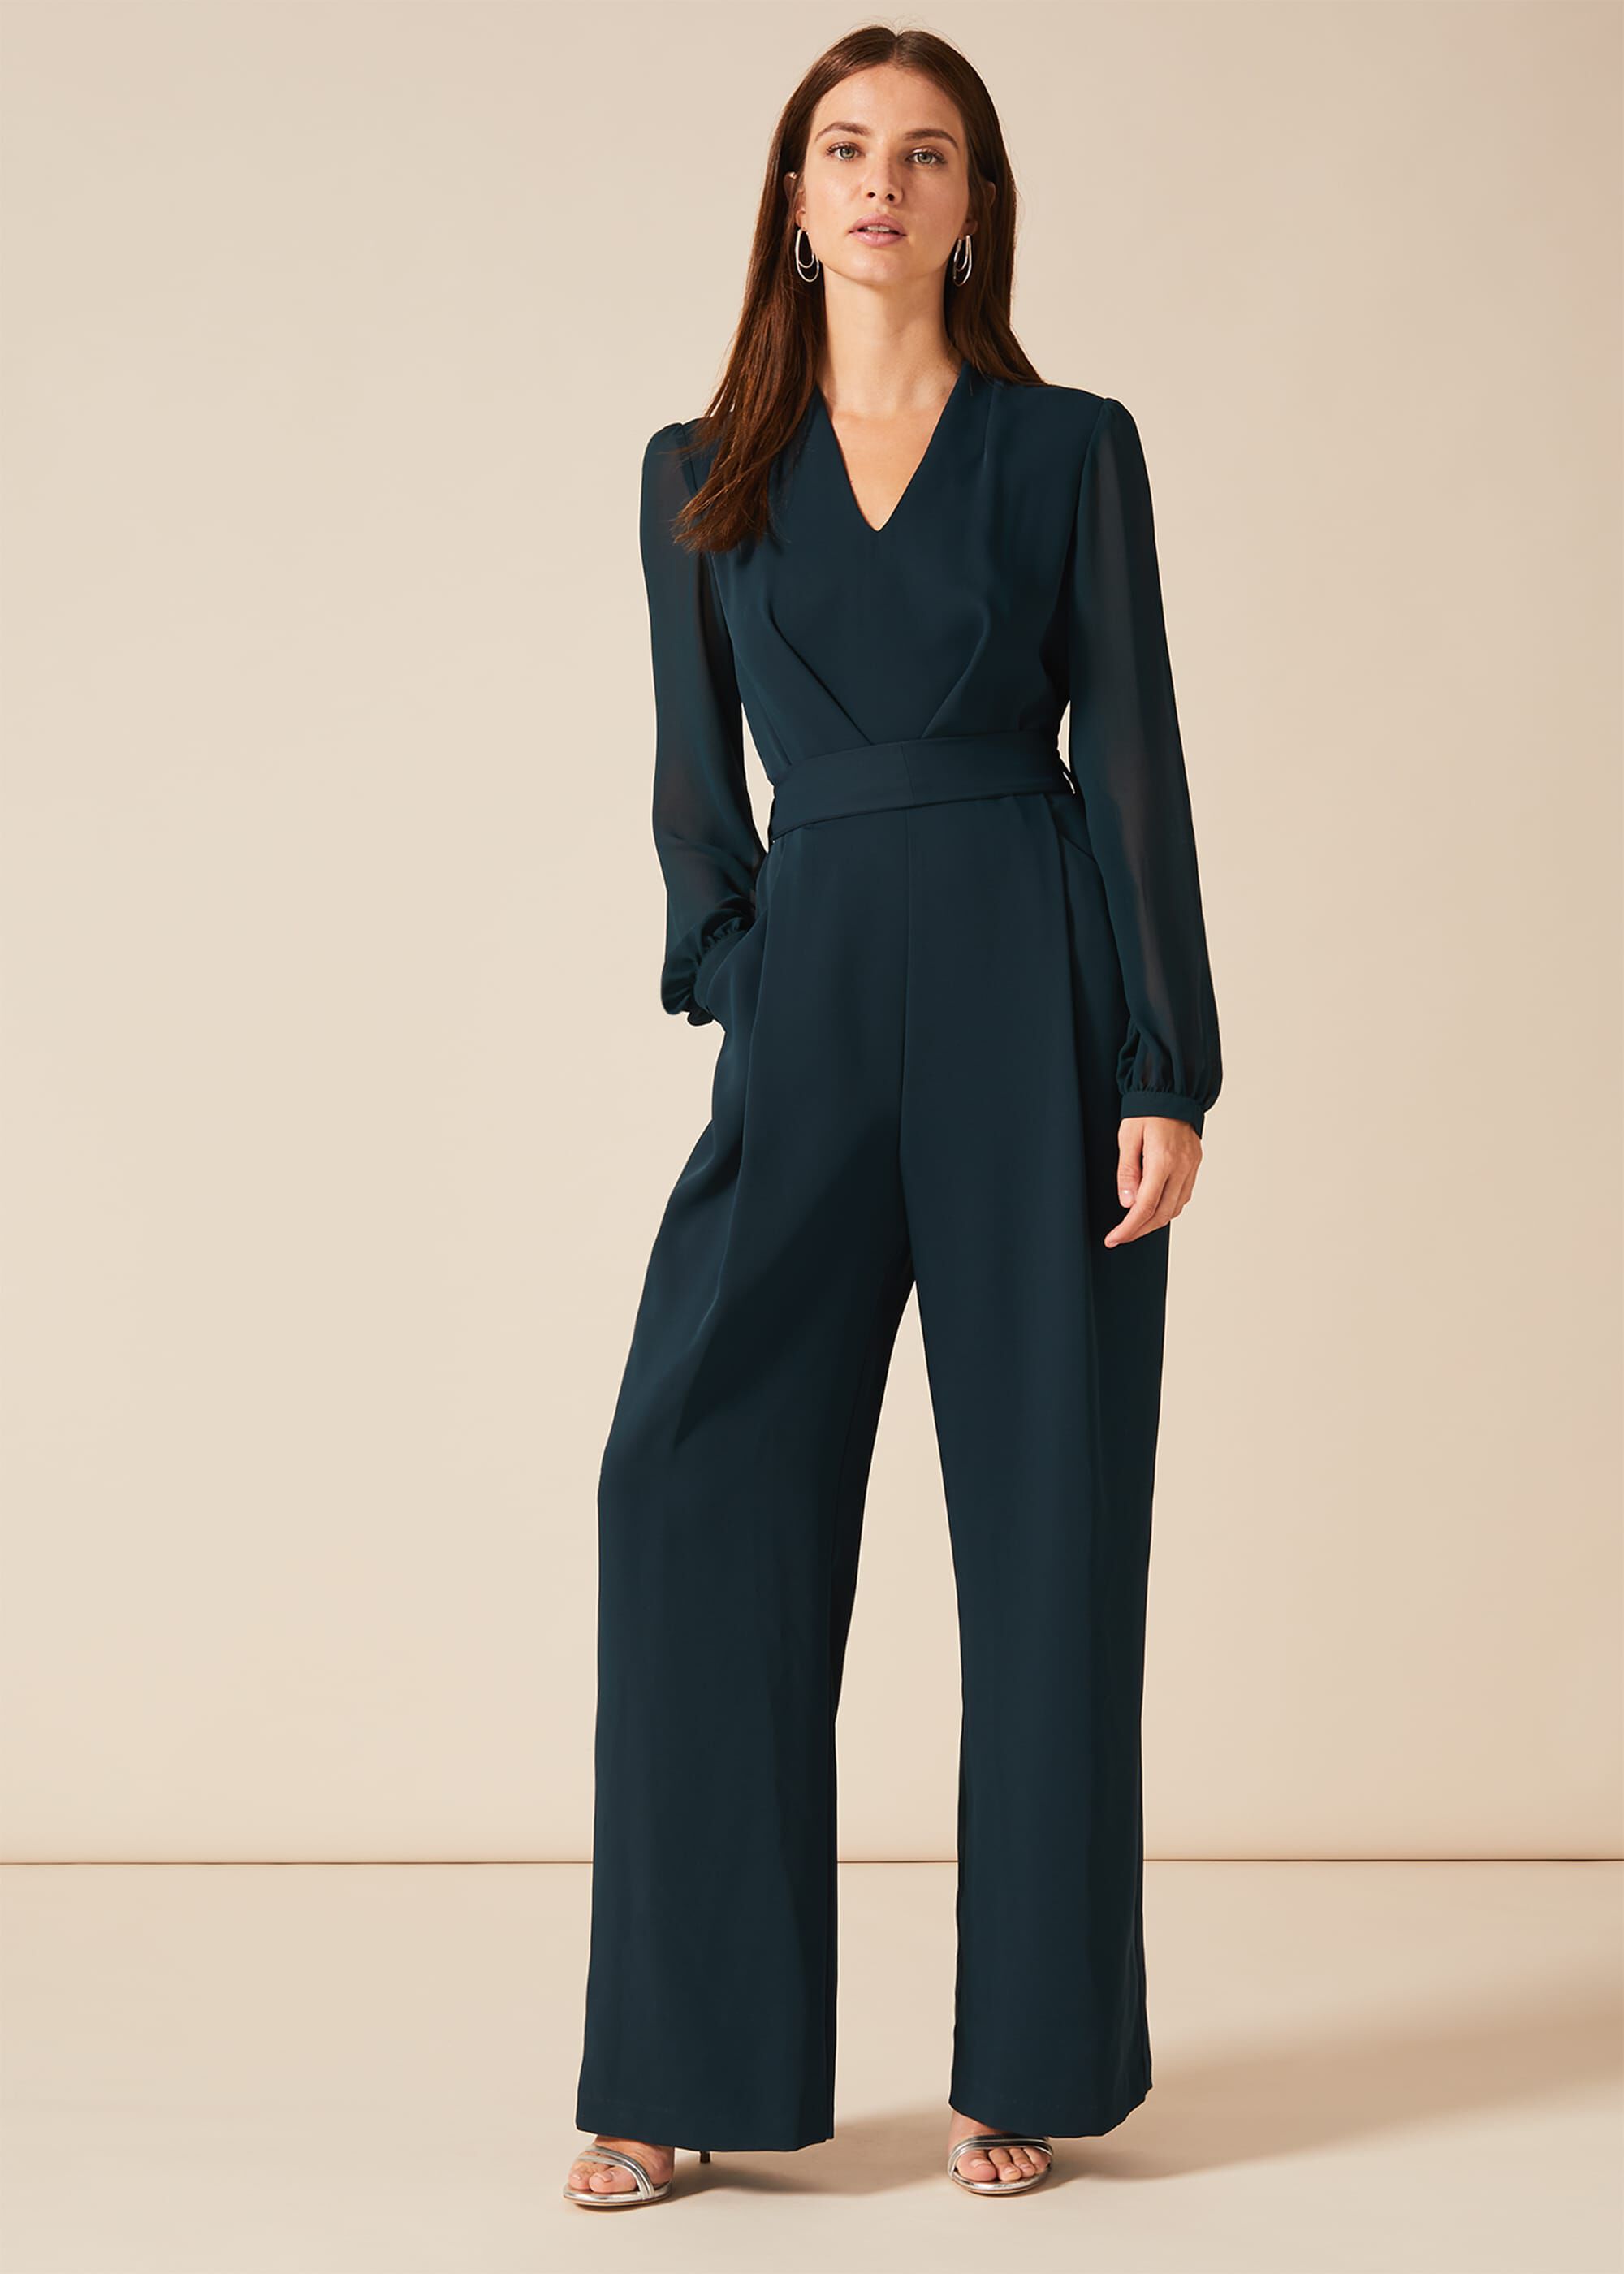 phase 8 trouser suits